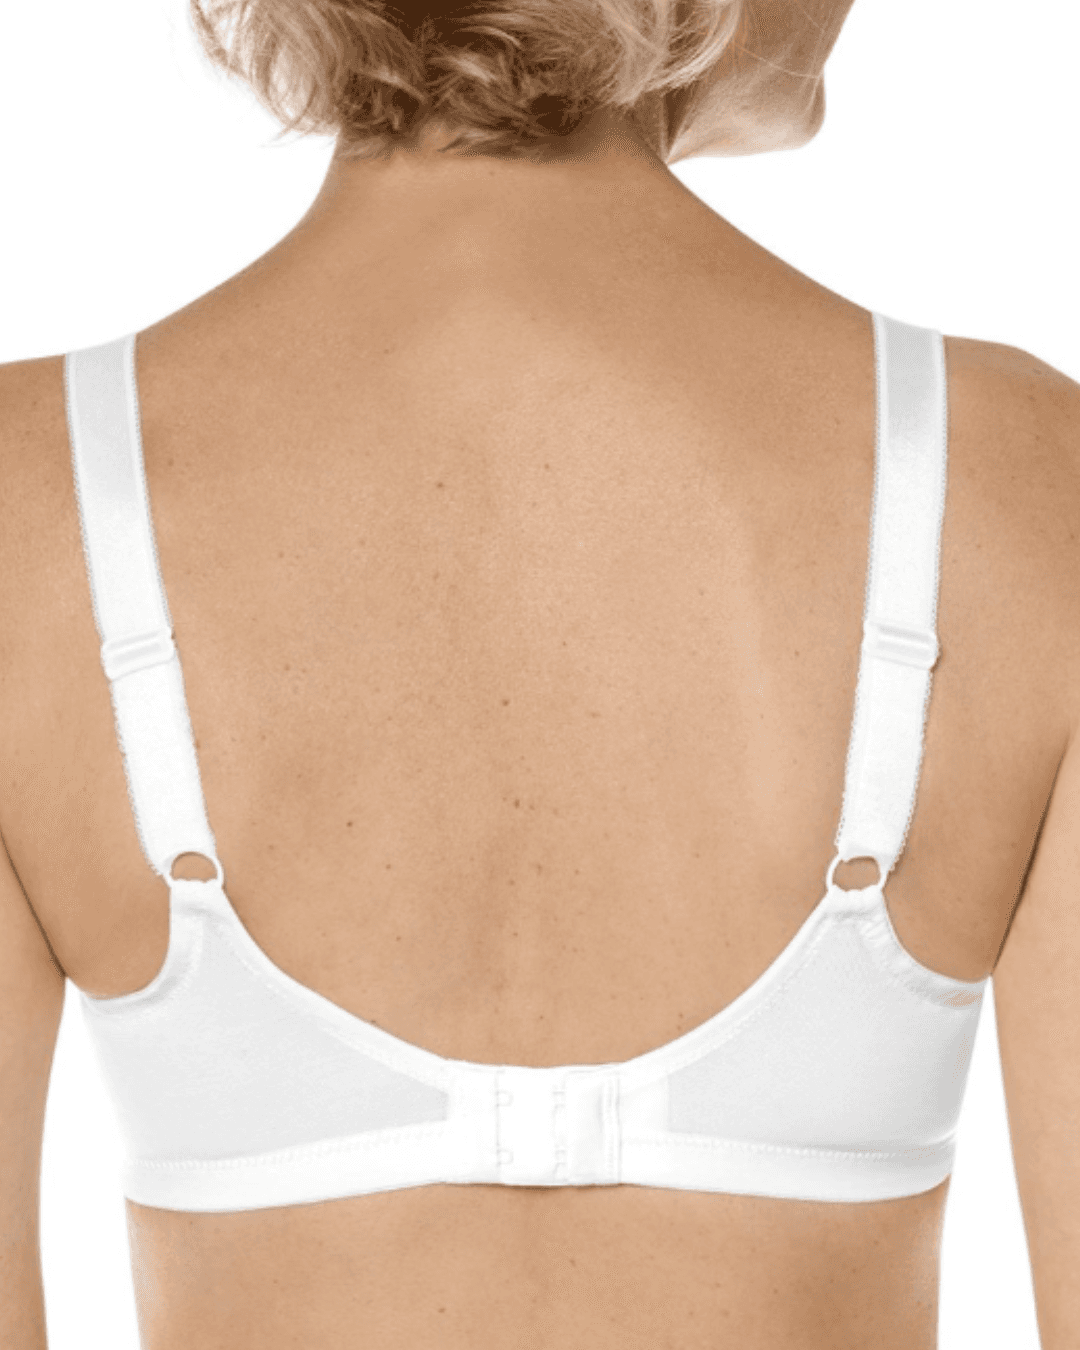 Amoena Post Mastectomy Bras & Breast Forms  The Fitting Service – The  Fitting Service